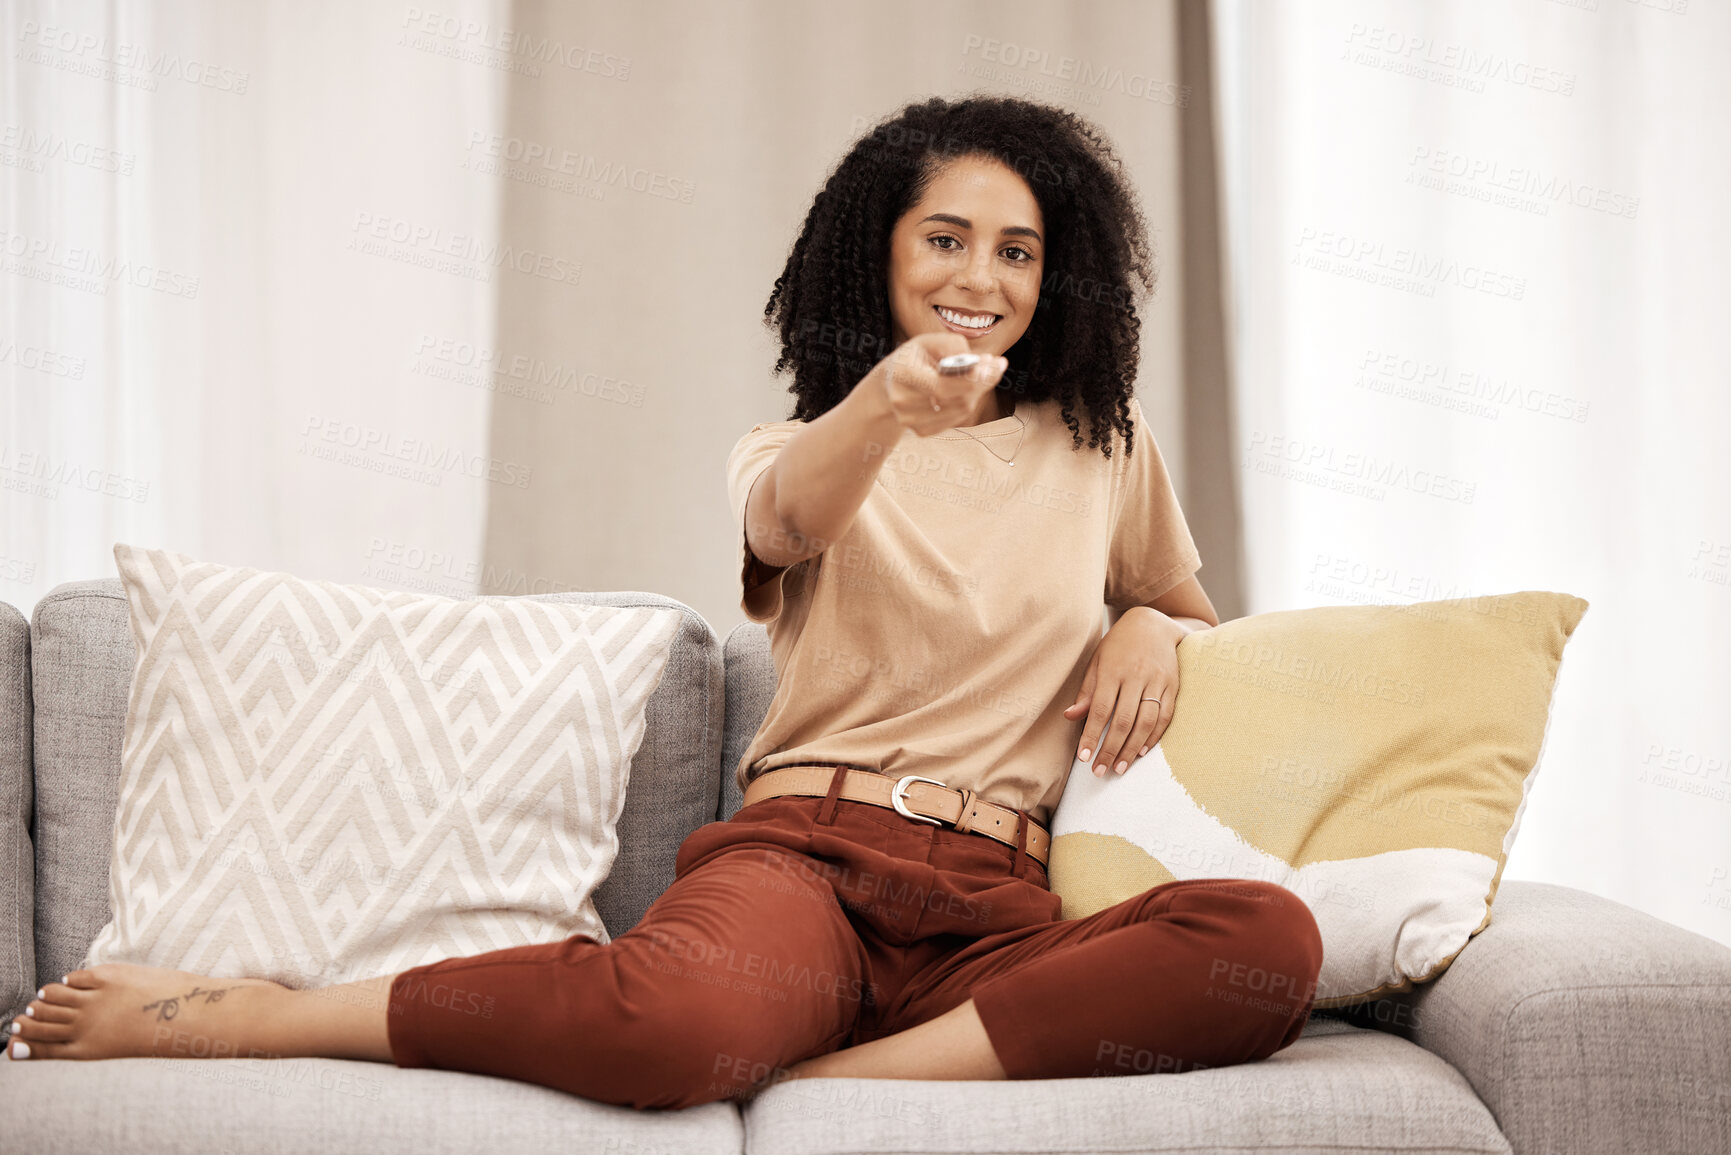 Buy stock photo Tv, portrait and woman relax on sofa, happy and smile while channel surfing in living room at home. Black woman, remote control and watching tv on a couch, excited about weekend freedom in her house